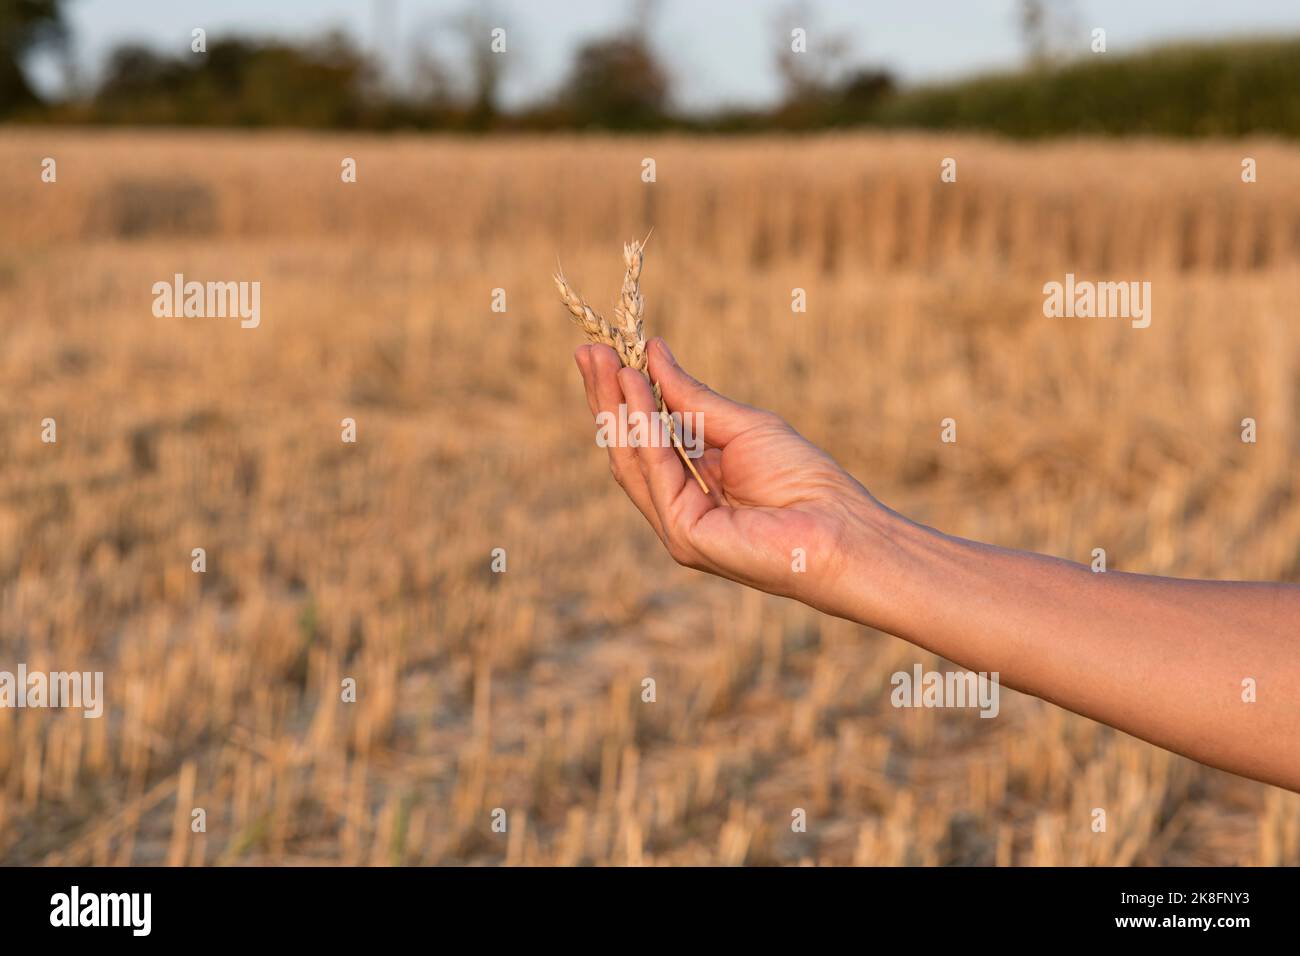 Hand of senior woman holding ear of wheat in field Stock Photo